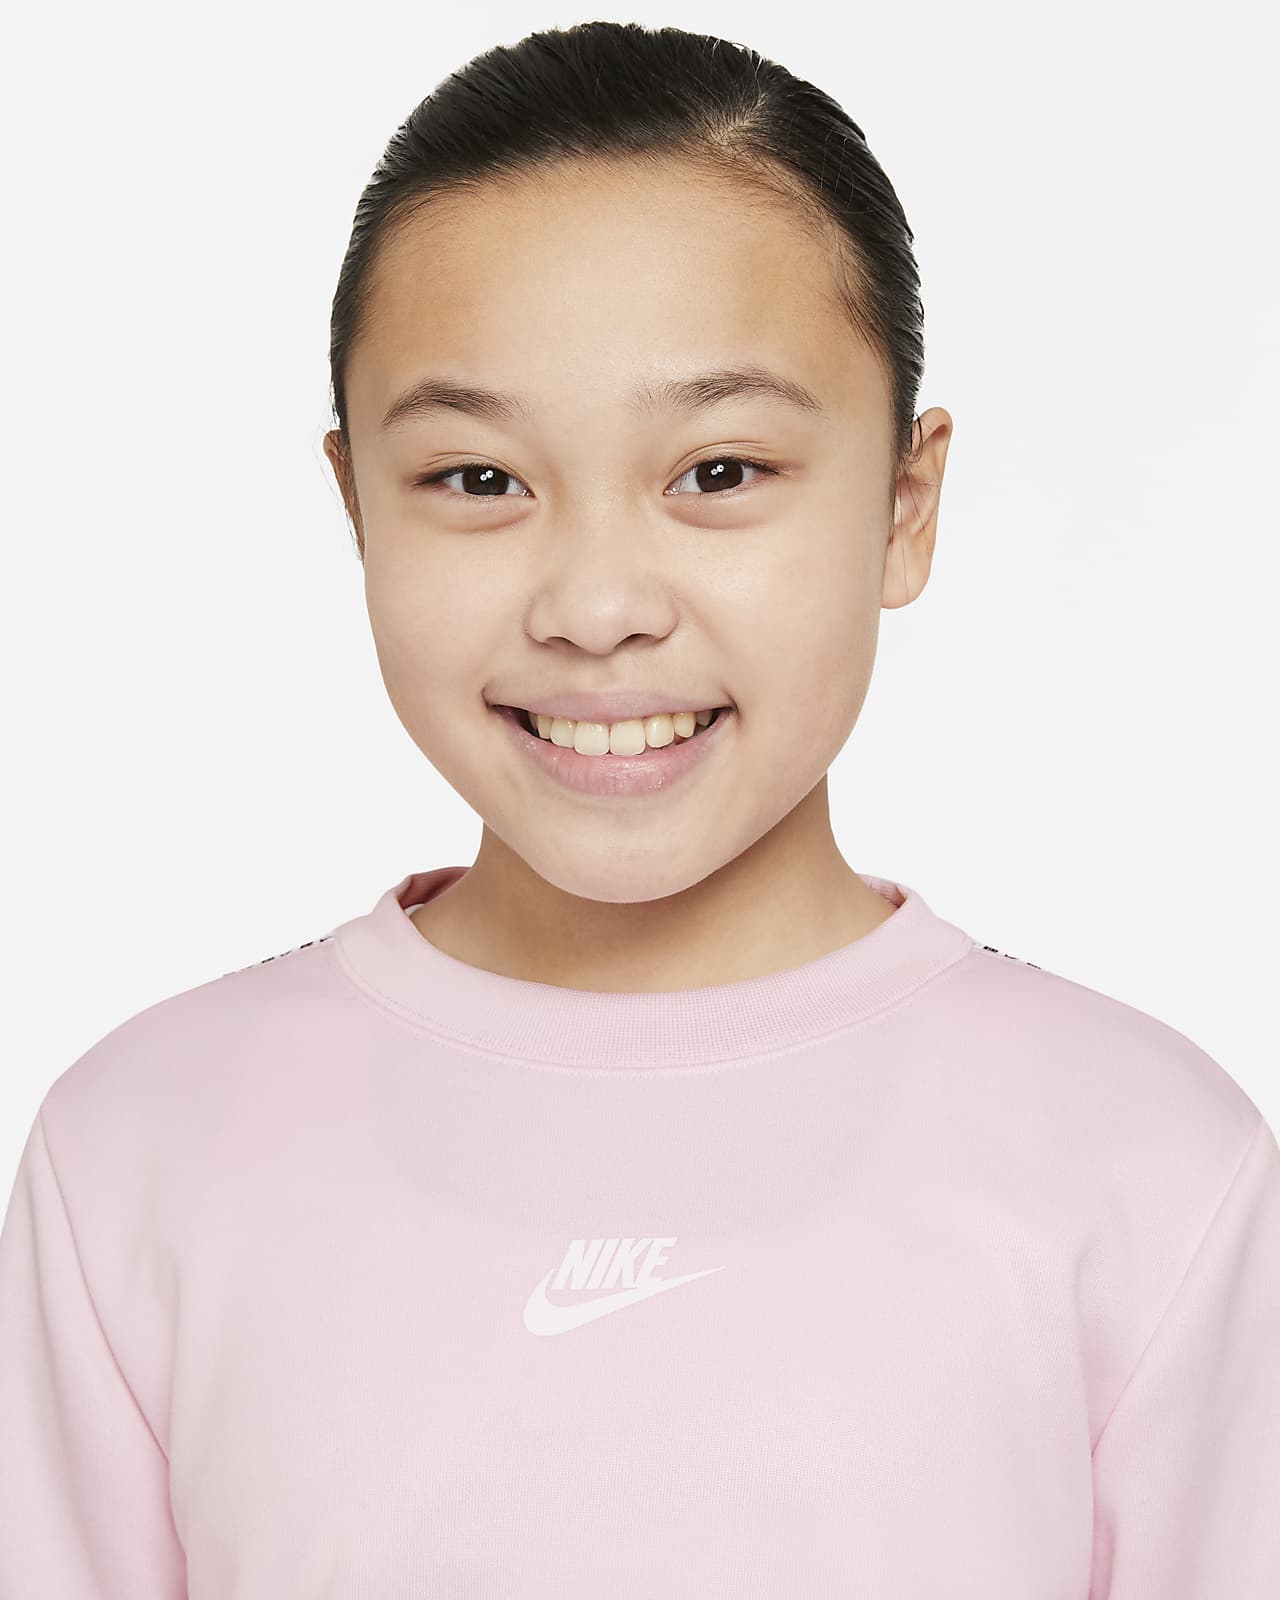 How To Be A Child Model For Nike - Kids Teens Nike Commercial Auditions ...